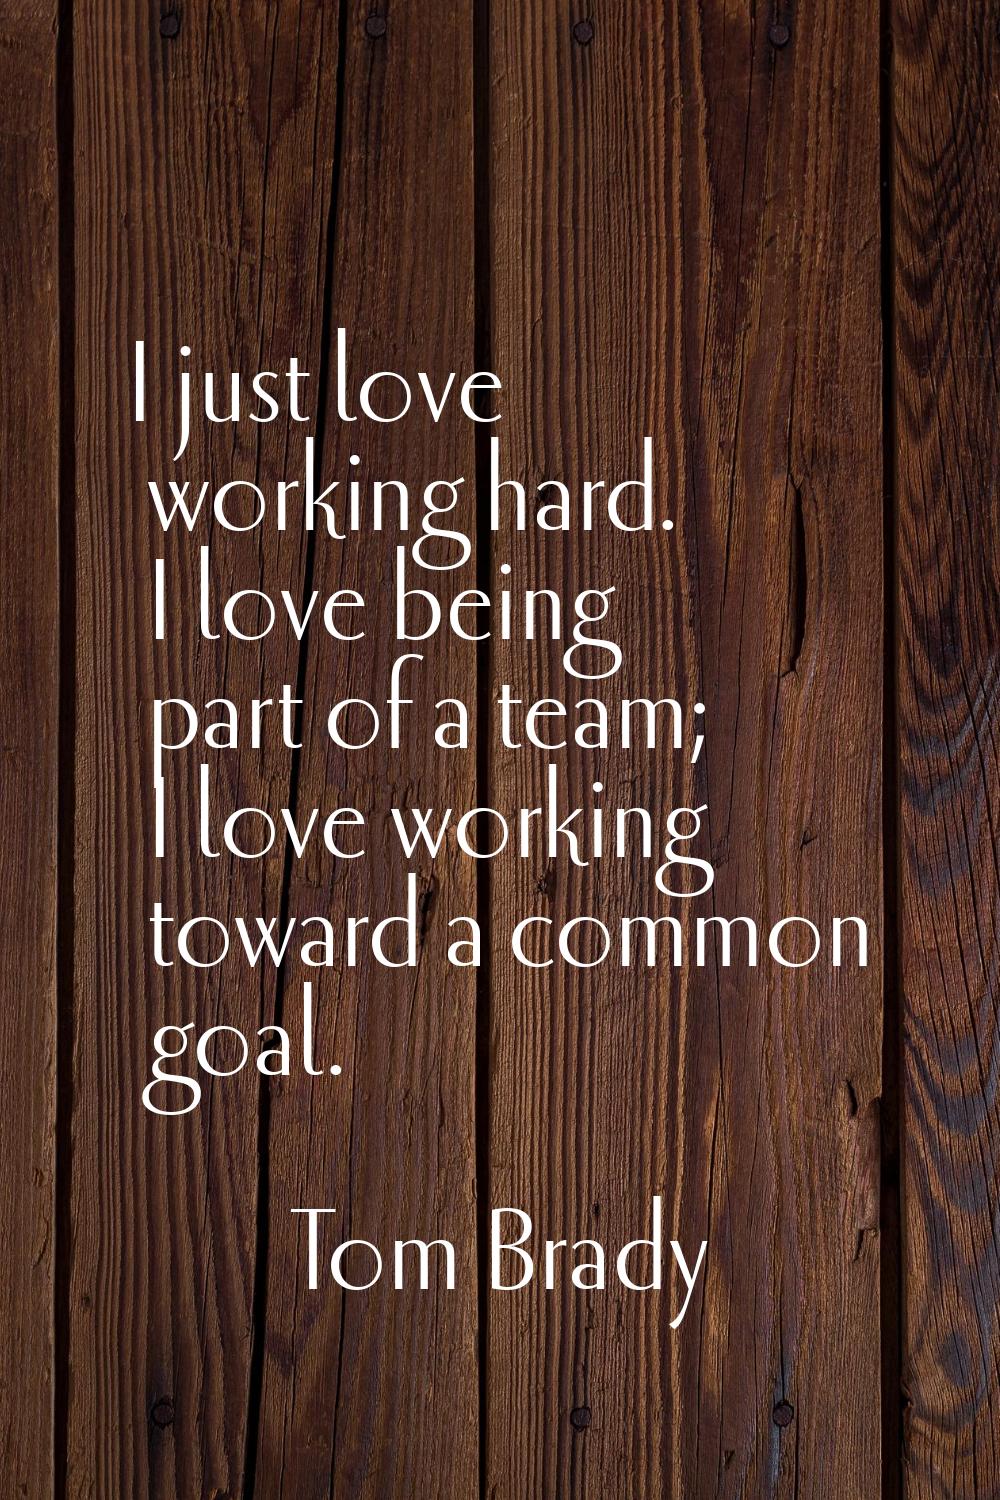 I just love working hard. I love being part of a team; I love working toward a common goal.